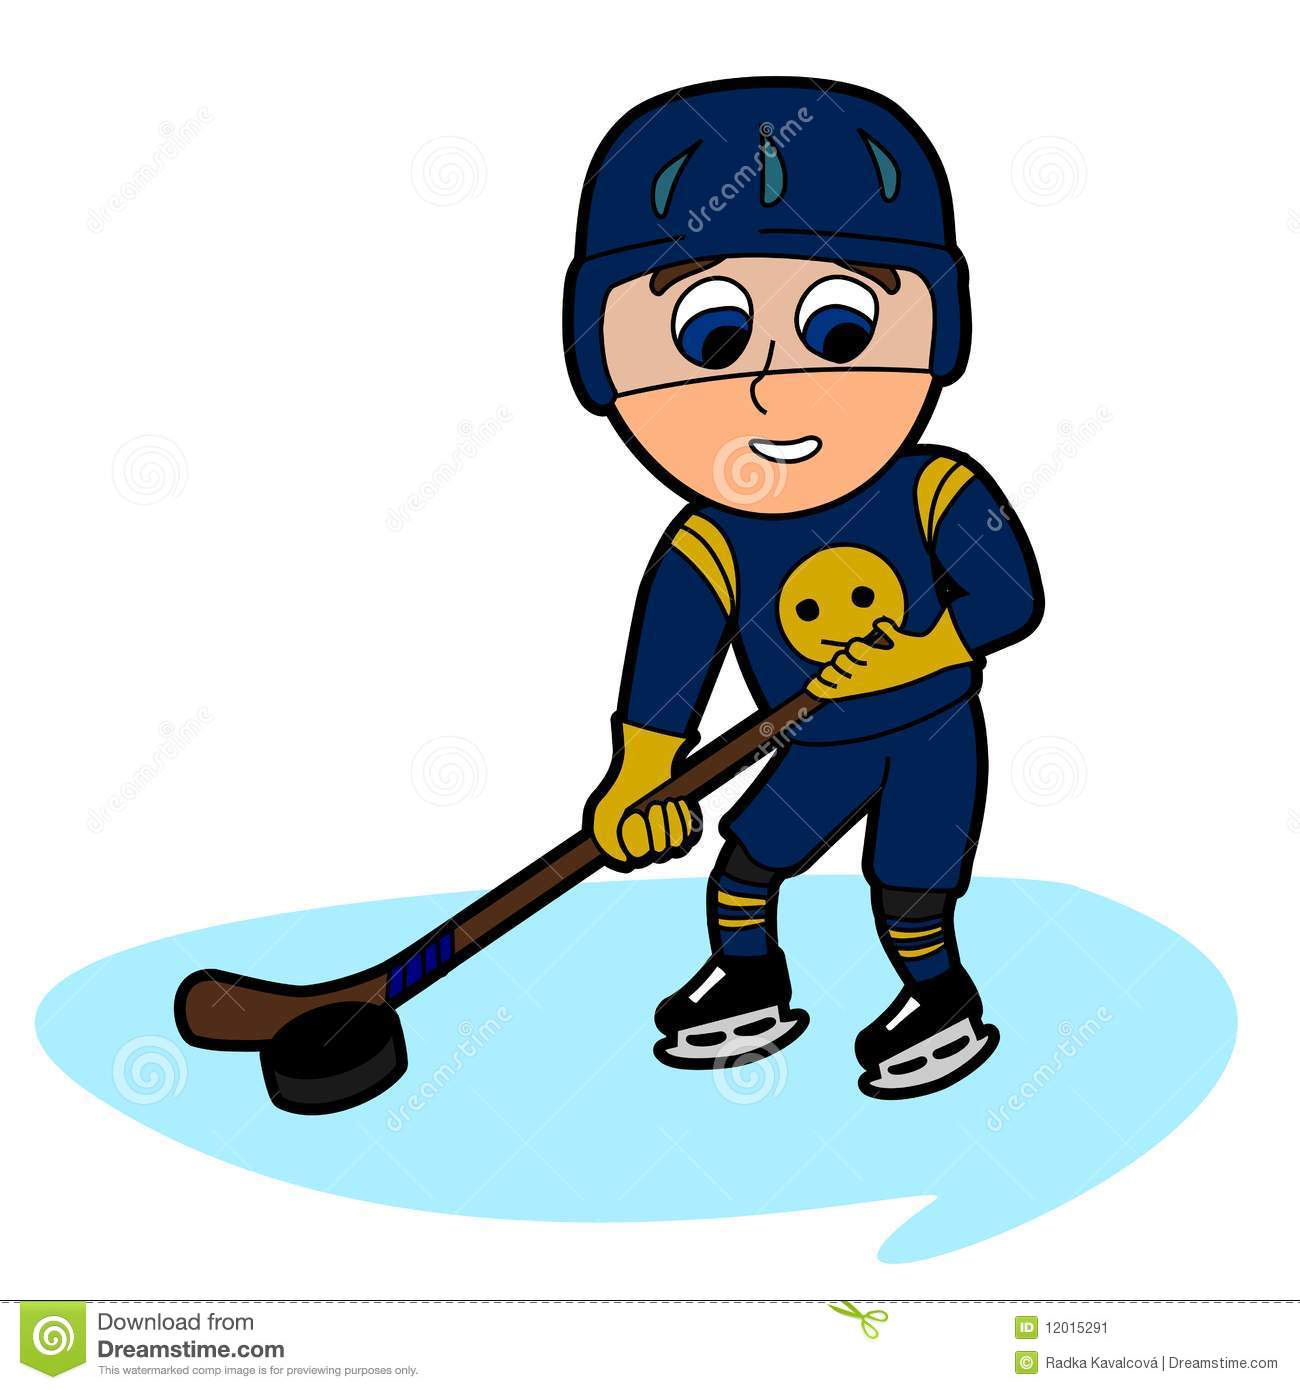 Kid Hockeyist Isolated On A White Backgrounnd